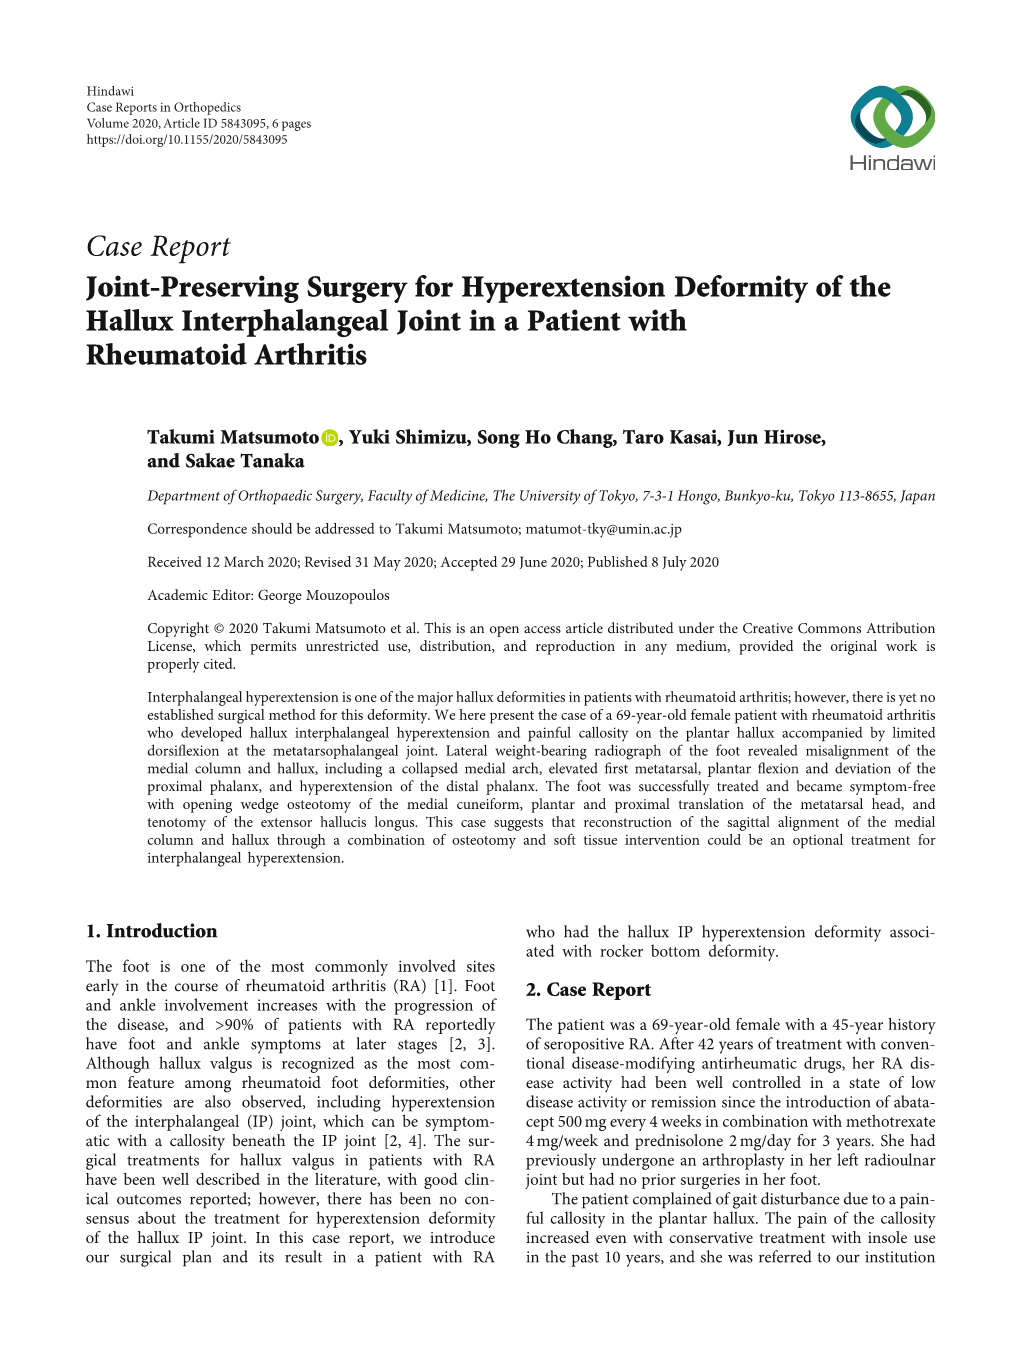 Joint-Preserving Surgery for Hyperextension Deformity of the Hallux Interphalangeal Joint in a Patient with Rheumatoid Arthritis